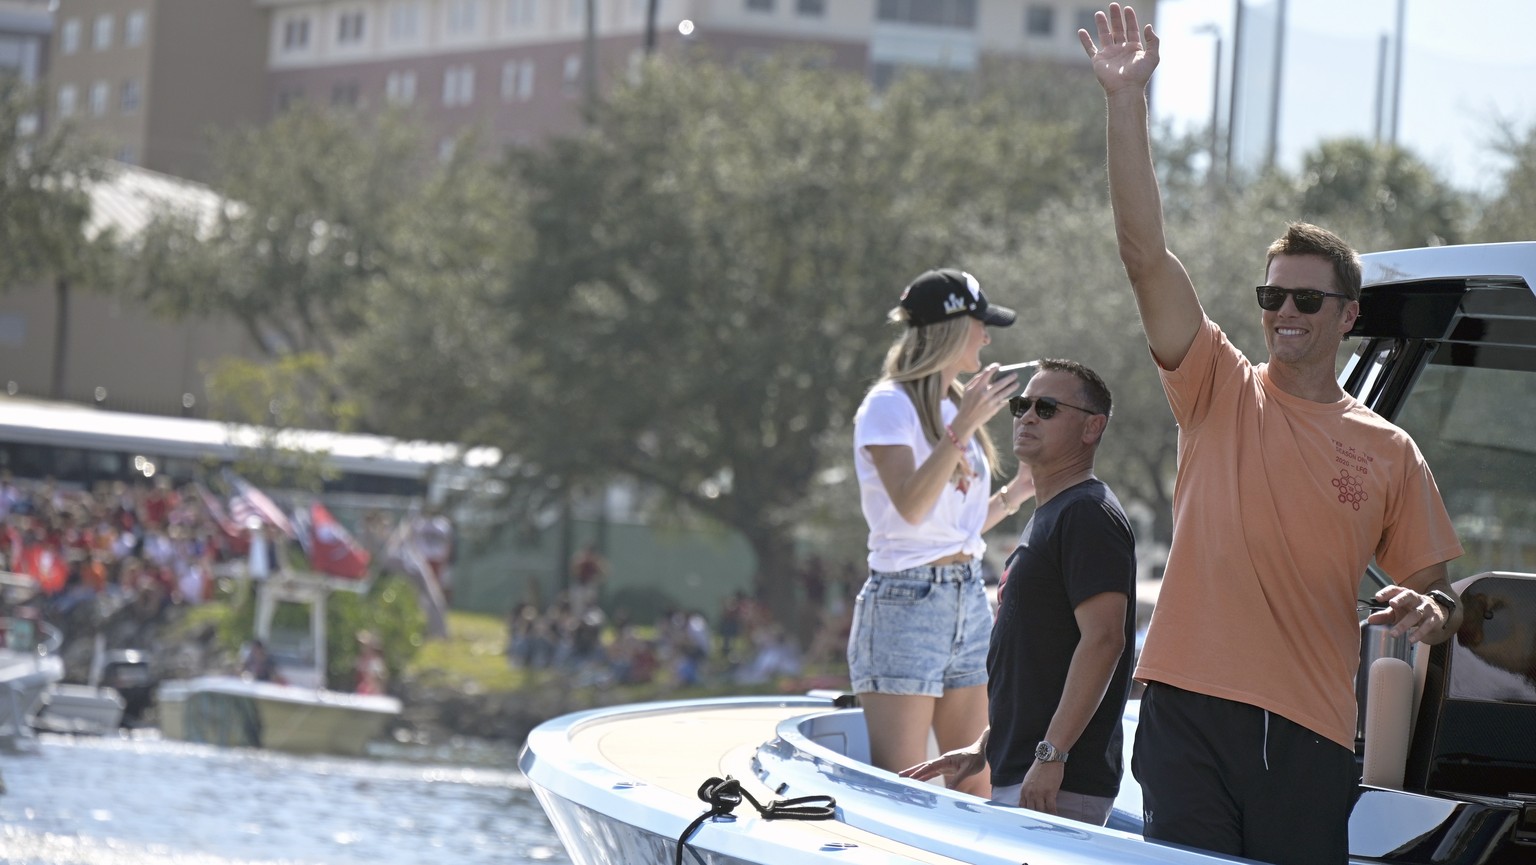 Tampa Bay Buccaneers NFL football quarterback Tom Brady waves to fans as he celebrates their Super Bowl 55 victory over the Kansas City Chiefs with a boat parade in Tampa, Fla., Wednesday, Feb. 10, 20 ...